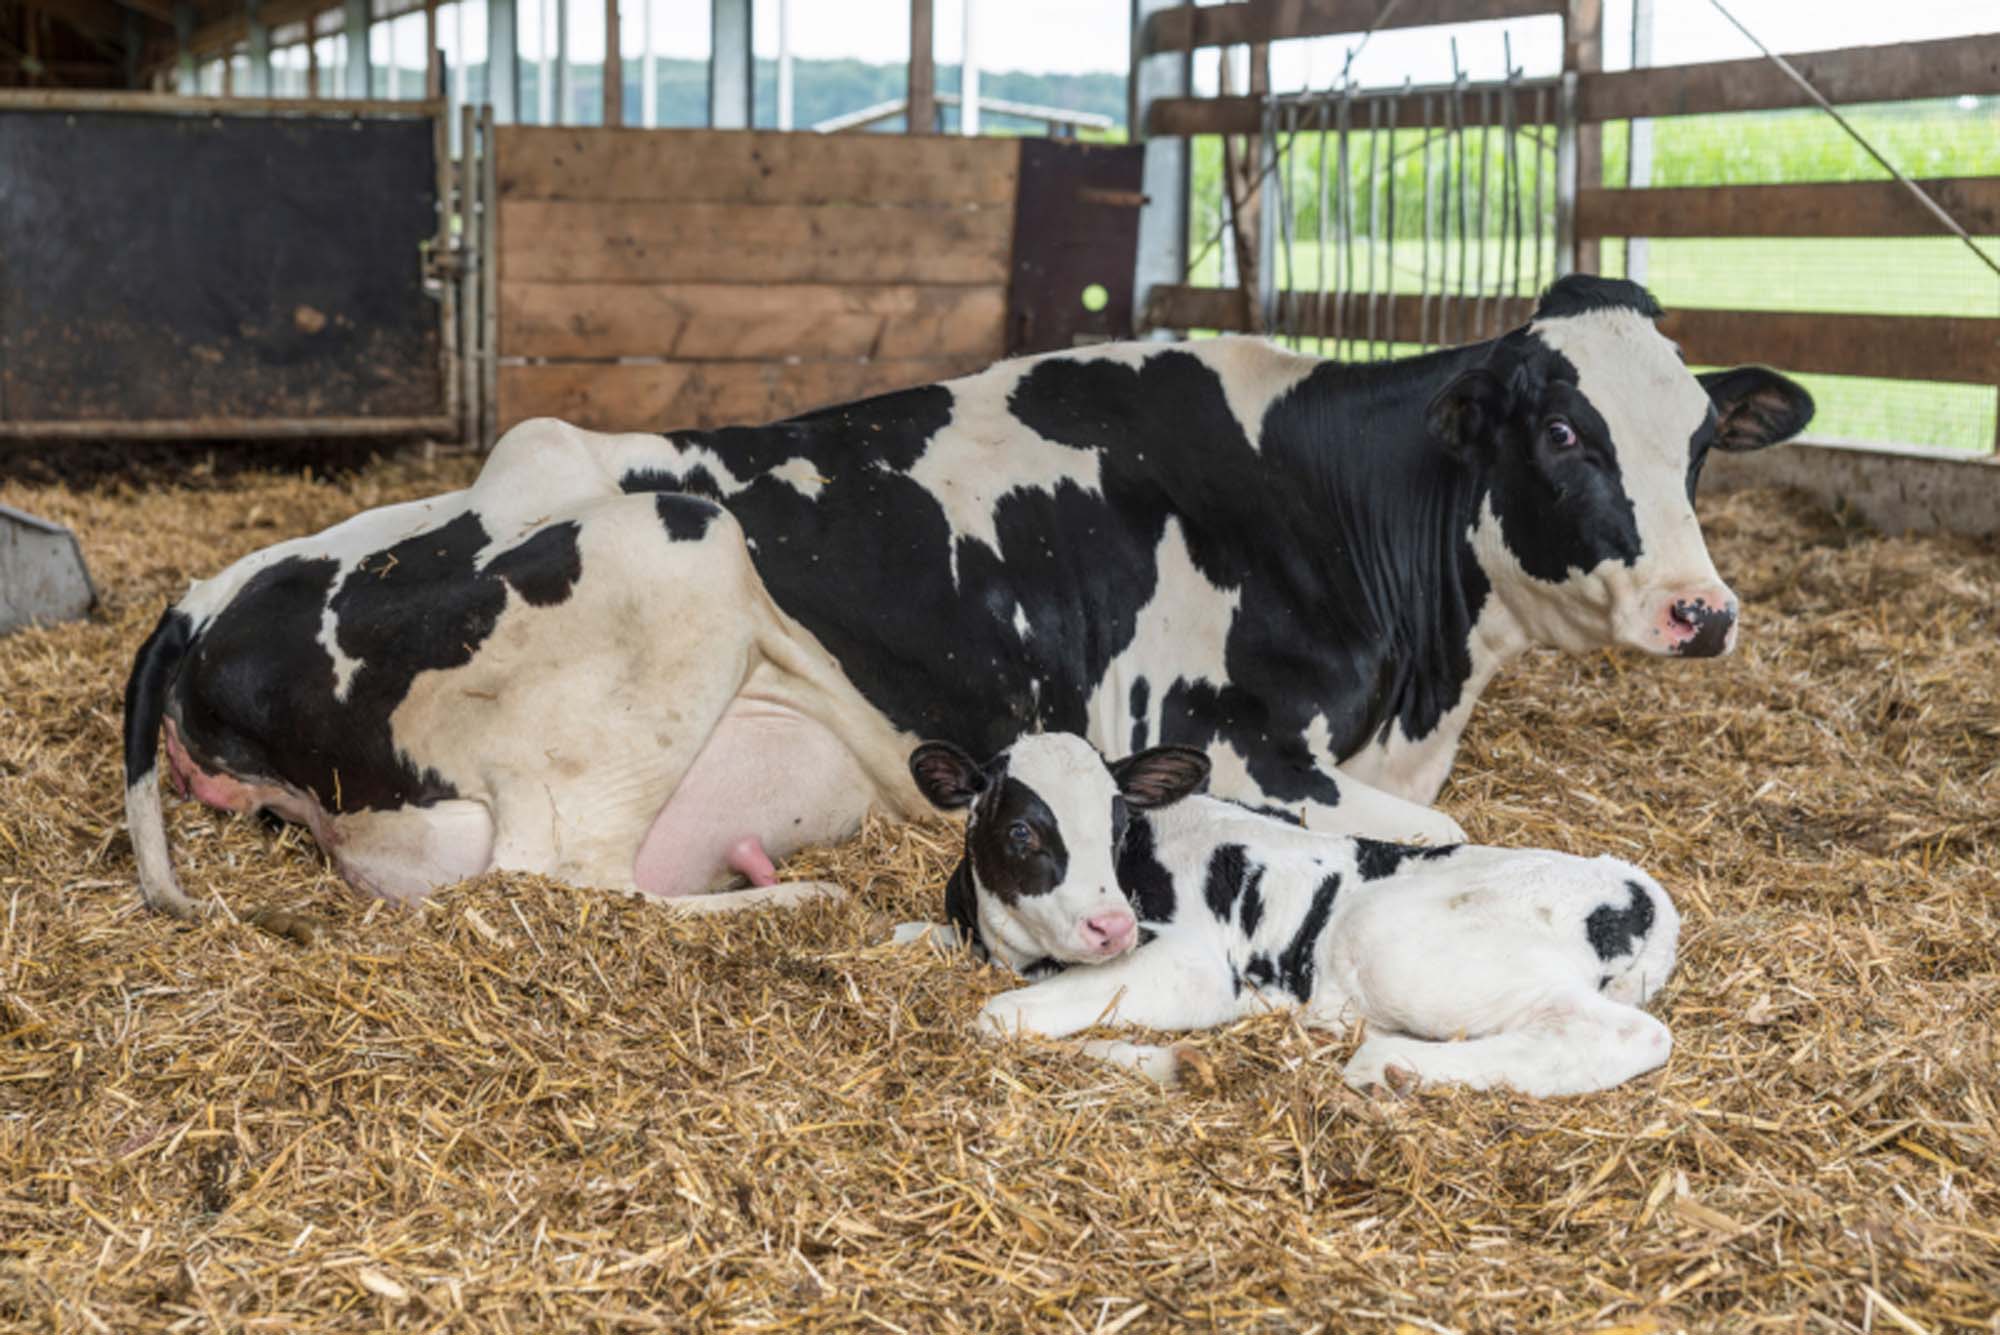 Holstein cow with calf lying on straw